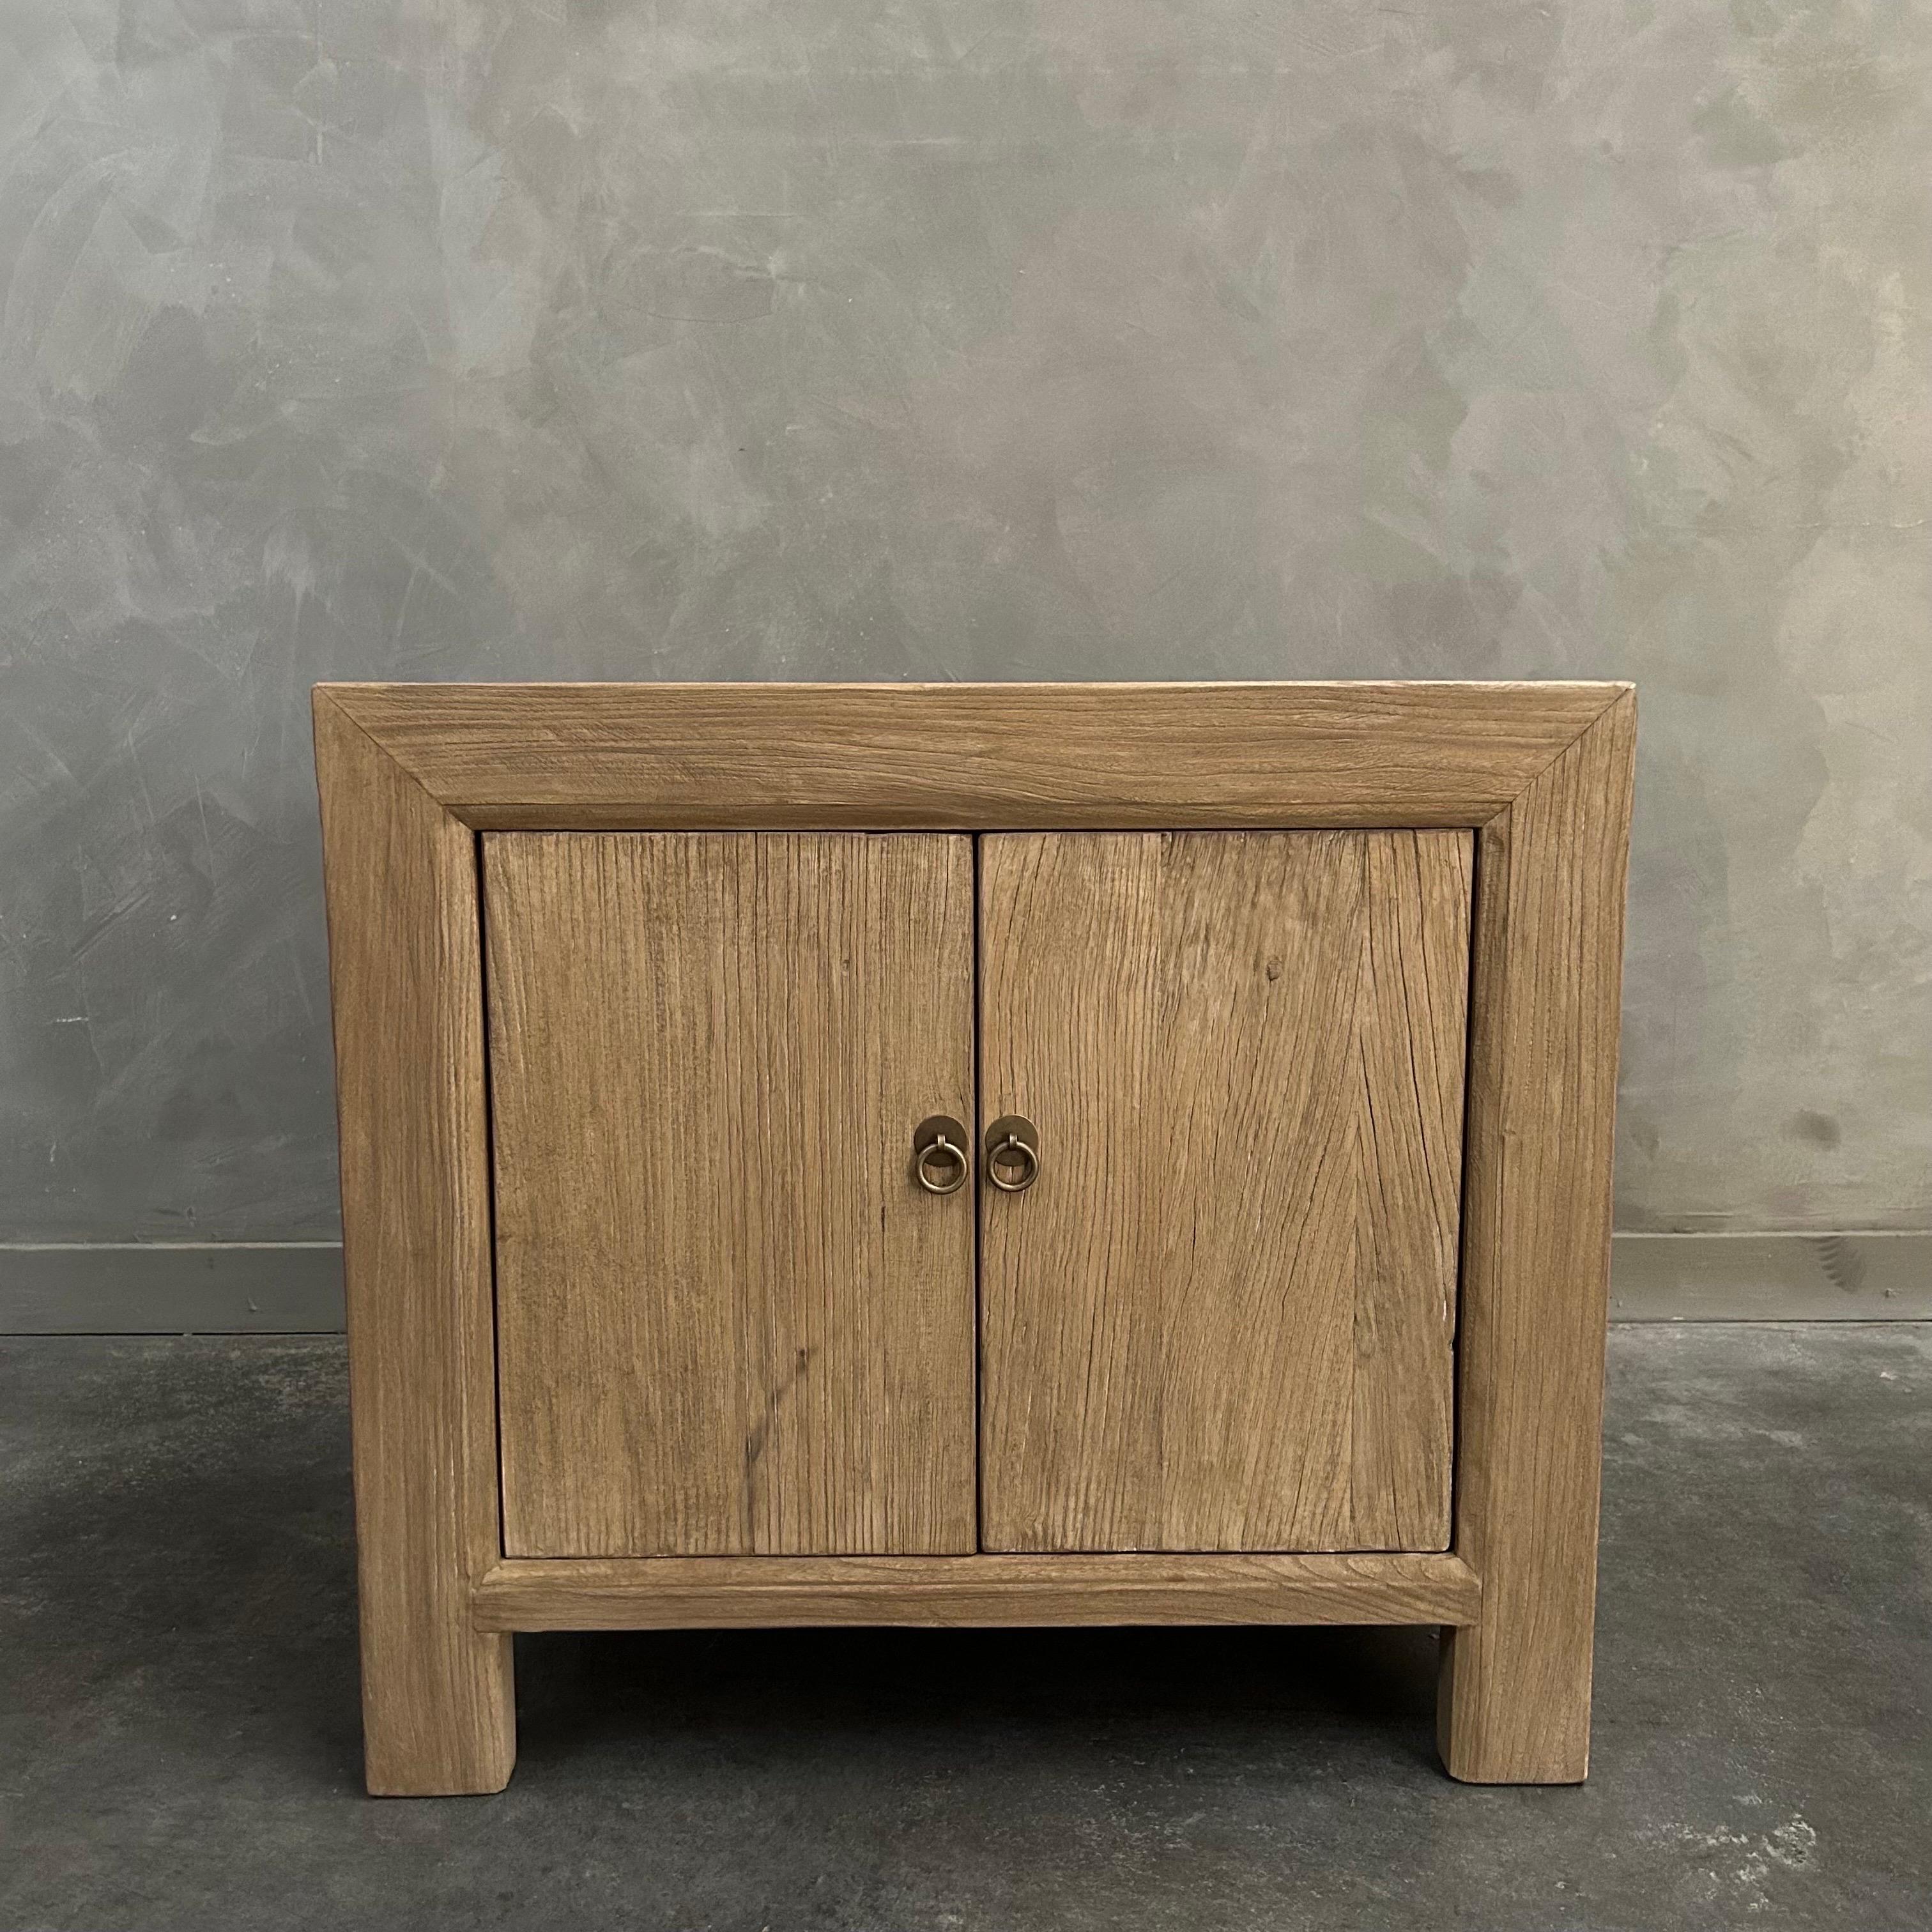 The most authentic materials are hand selected, and hours of hand-craftsmanship go into each piece, creating each and every piece, no one is exactly alike. Solid elm wood finished with a natural wax.
The artisanal construction methods highlight the